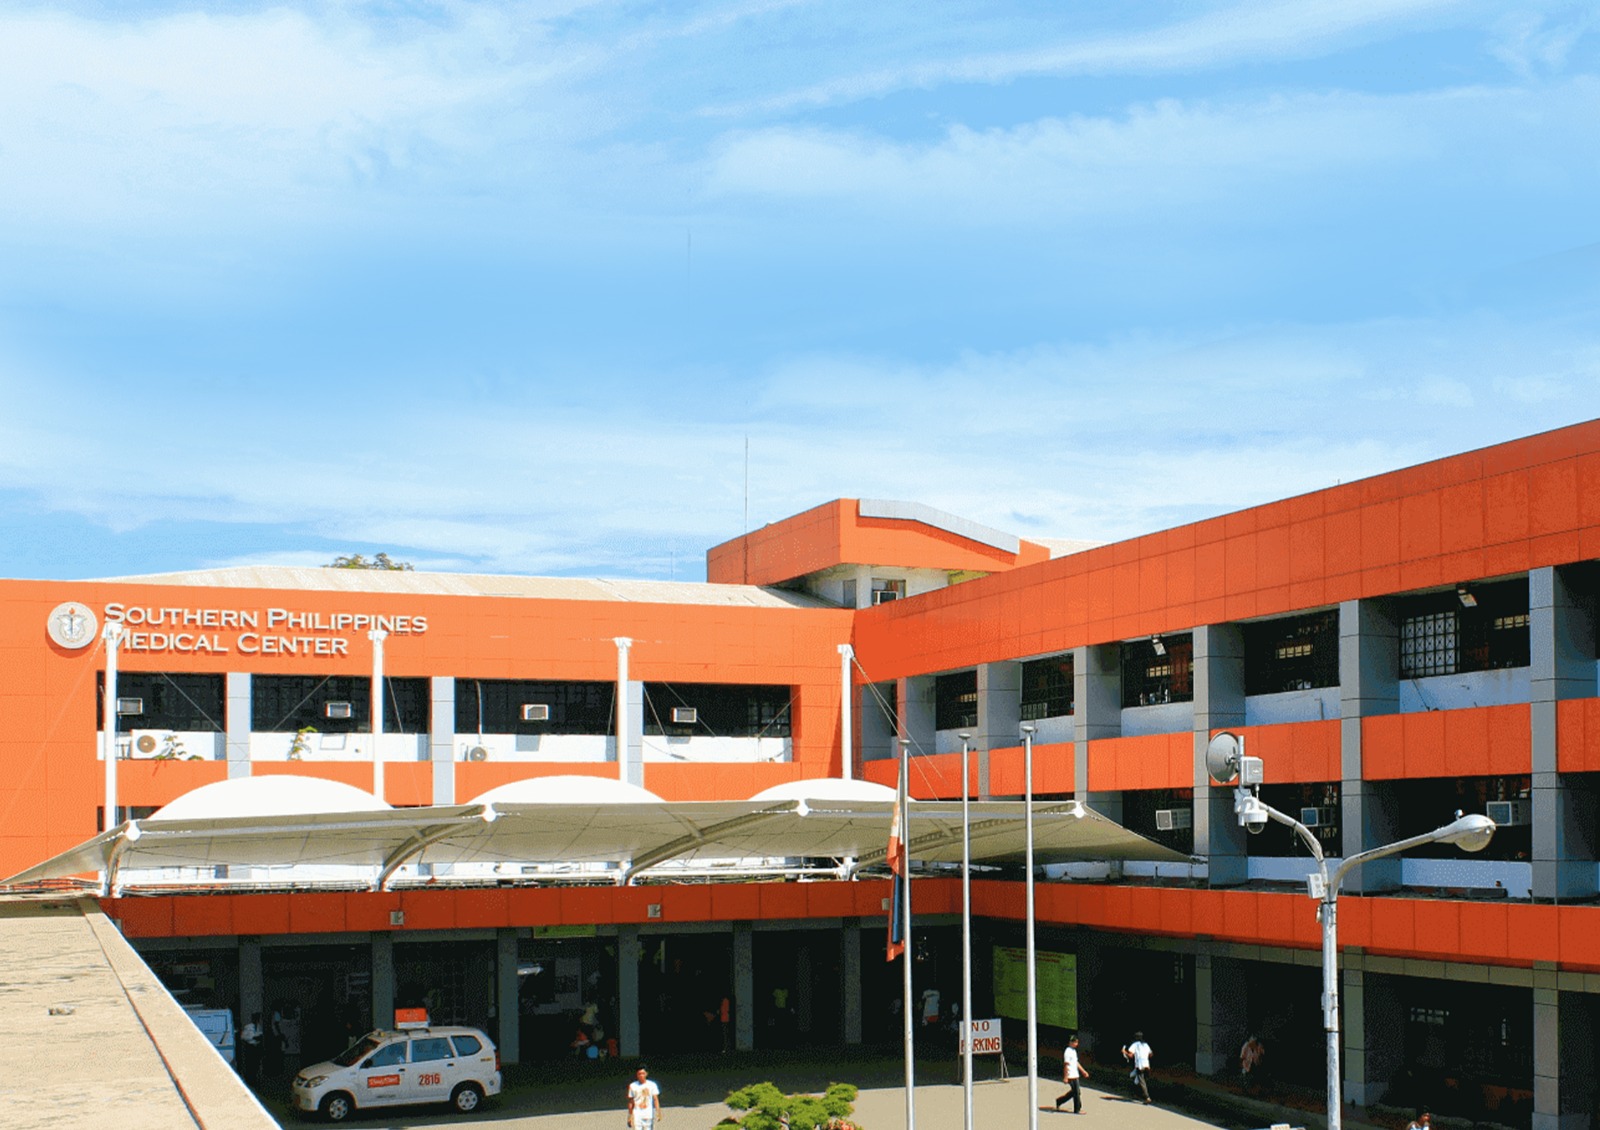 Davao Hospital within DMSF Campus